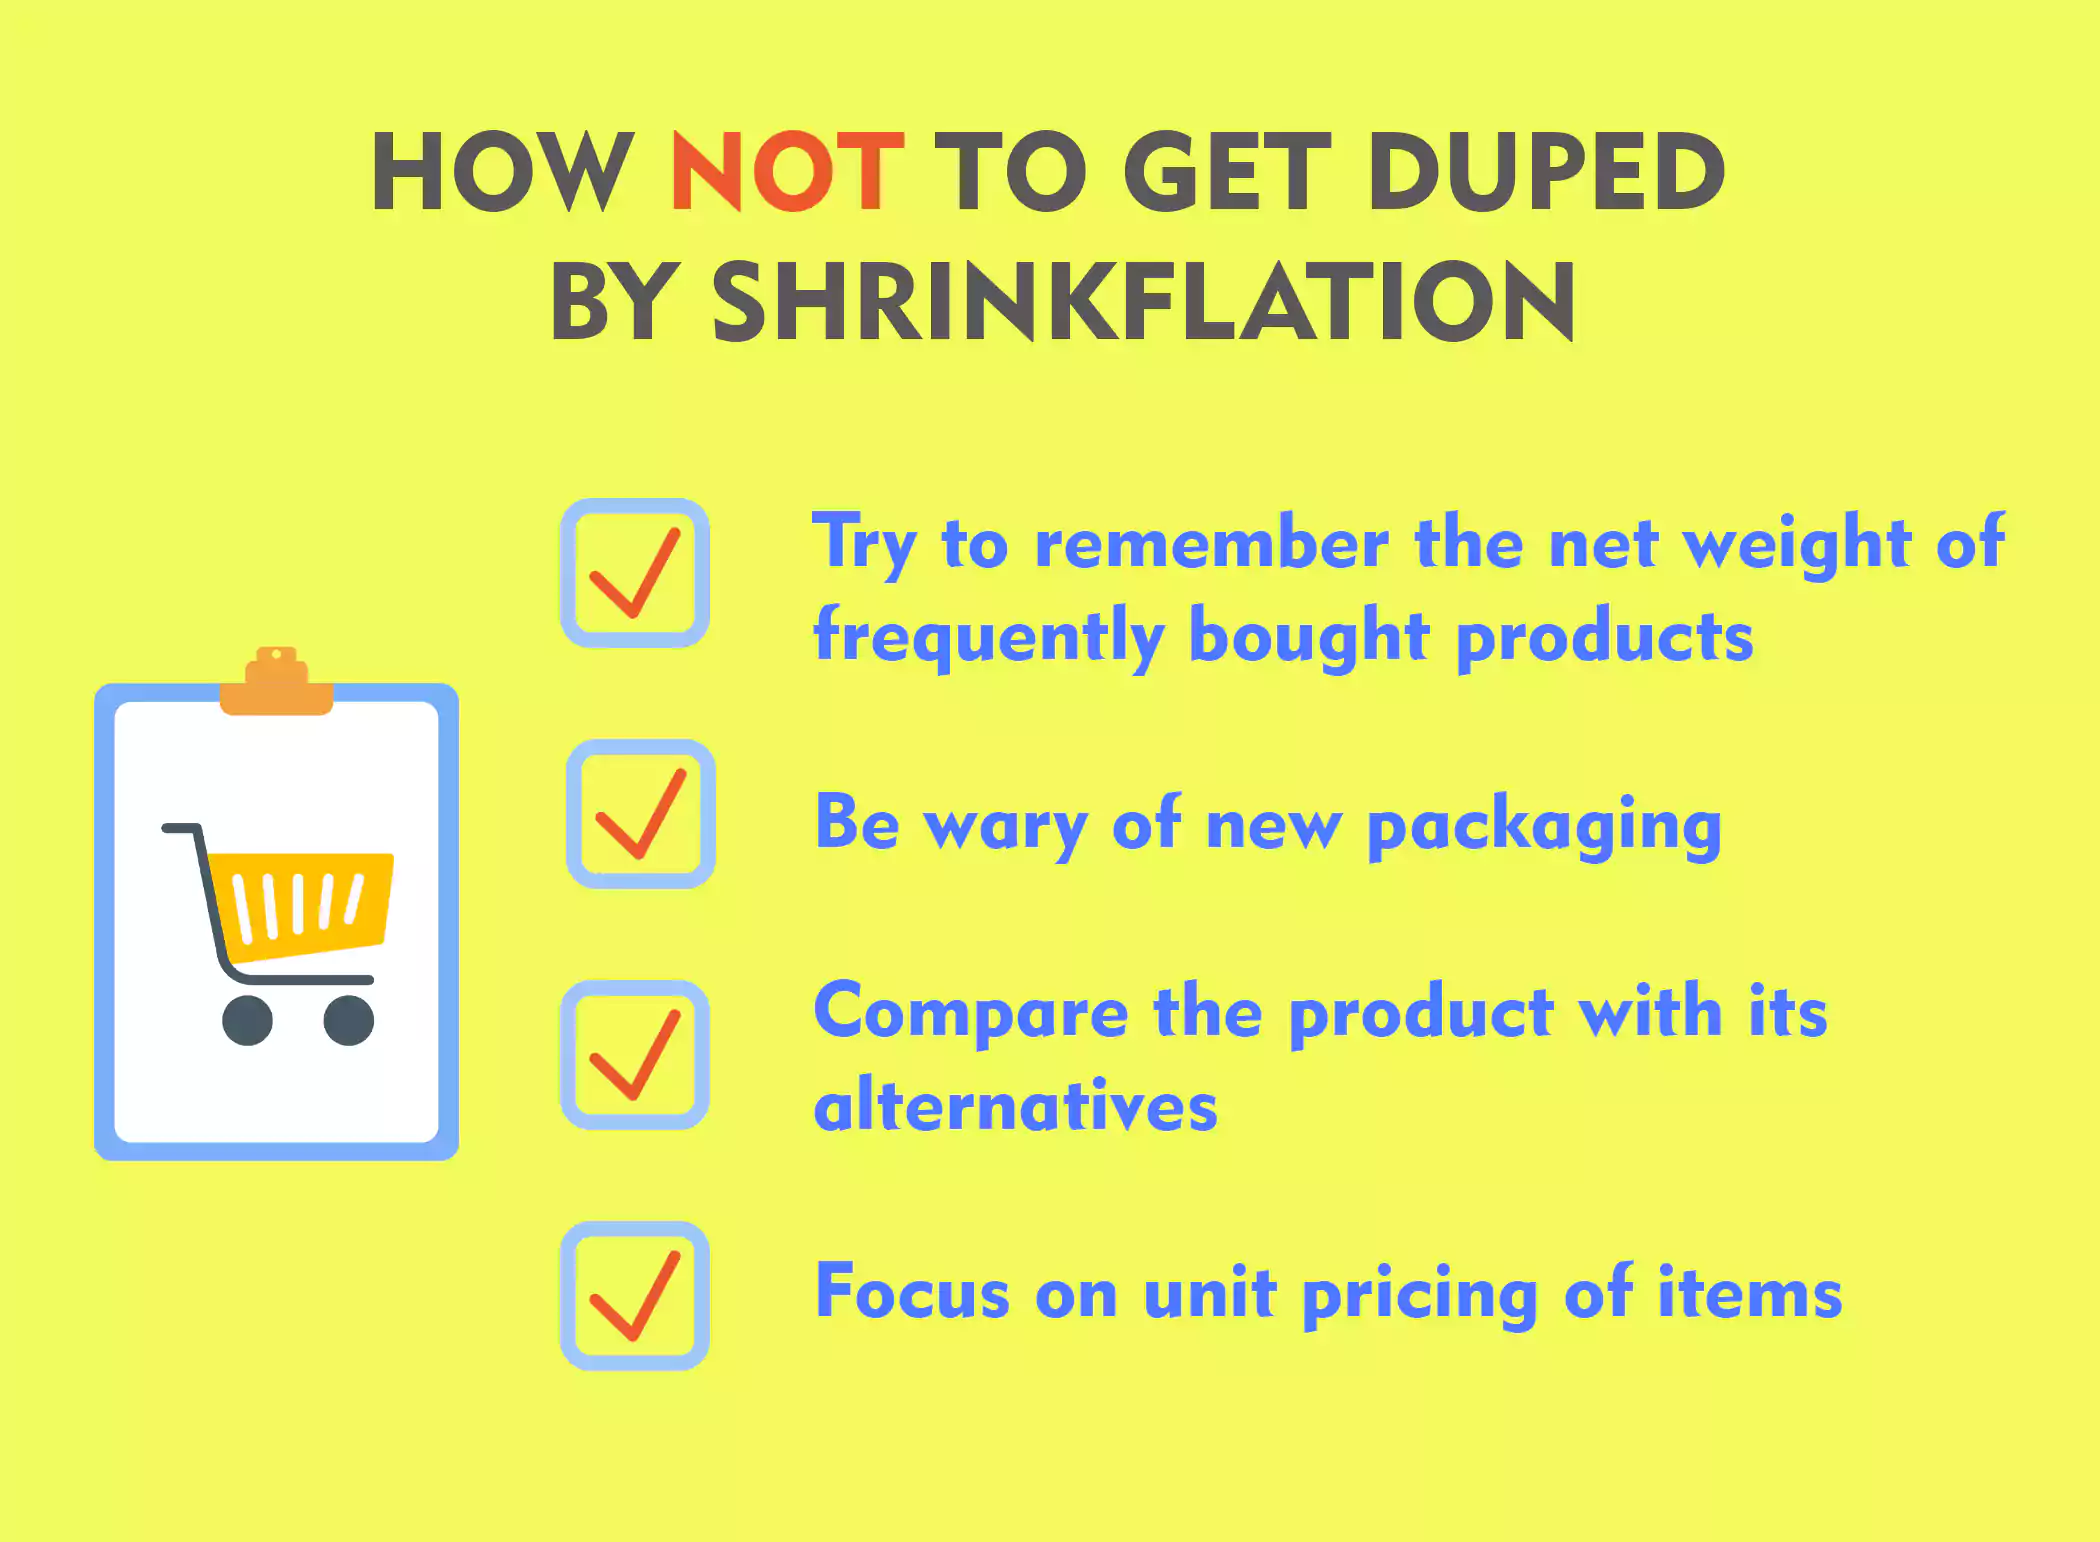 How not to get duped by shrinkflation